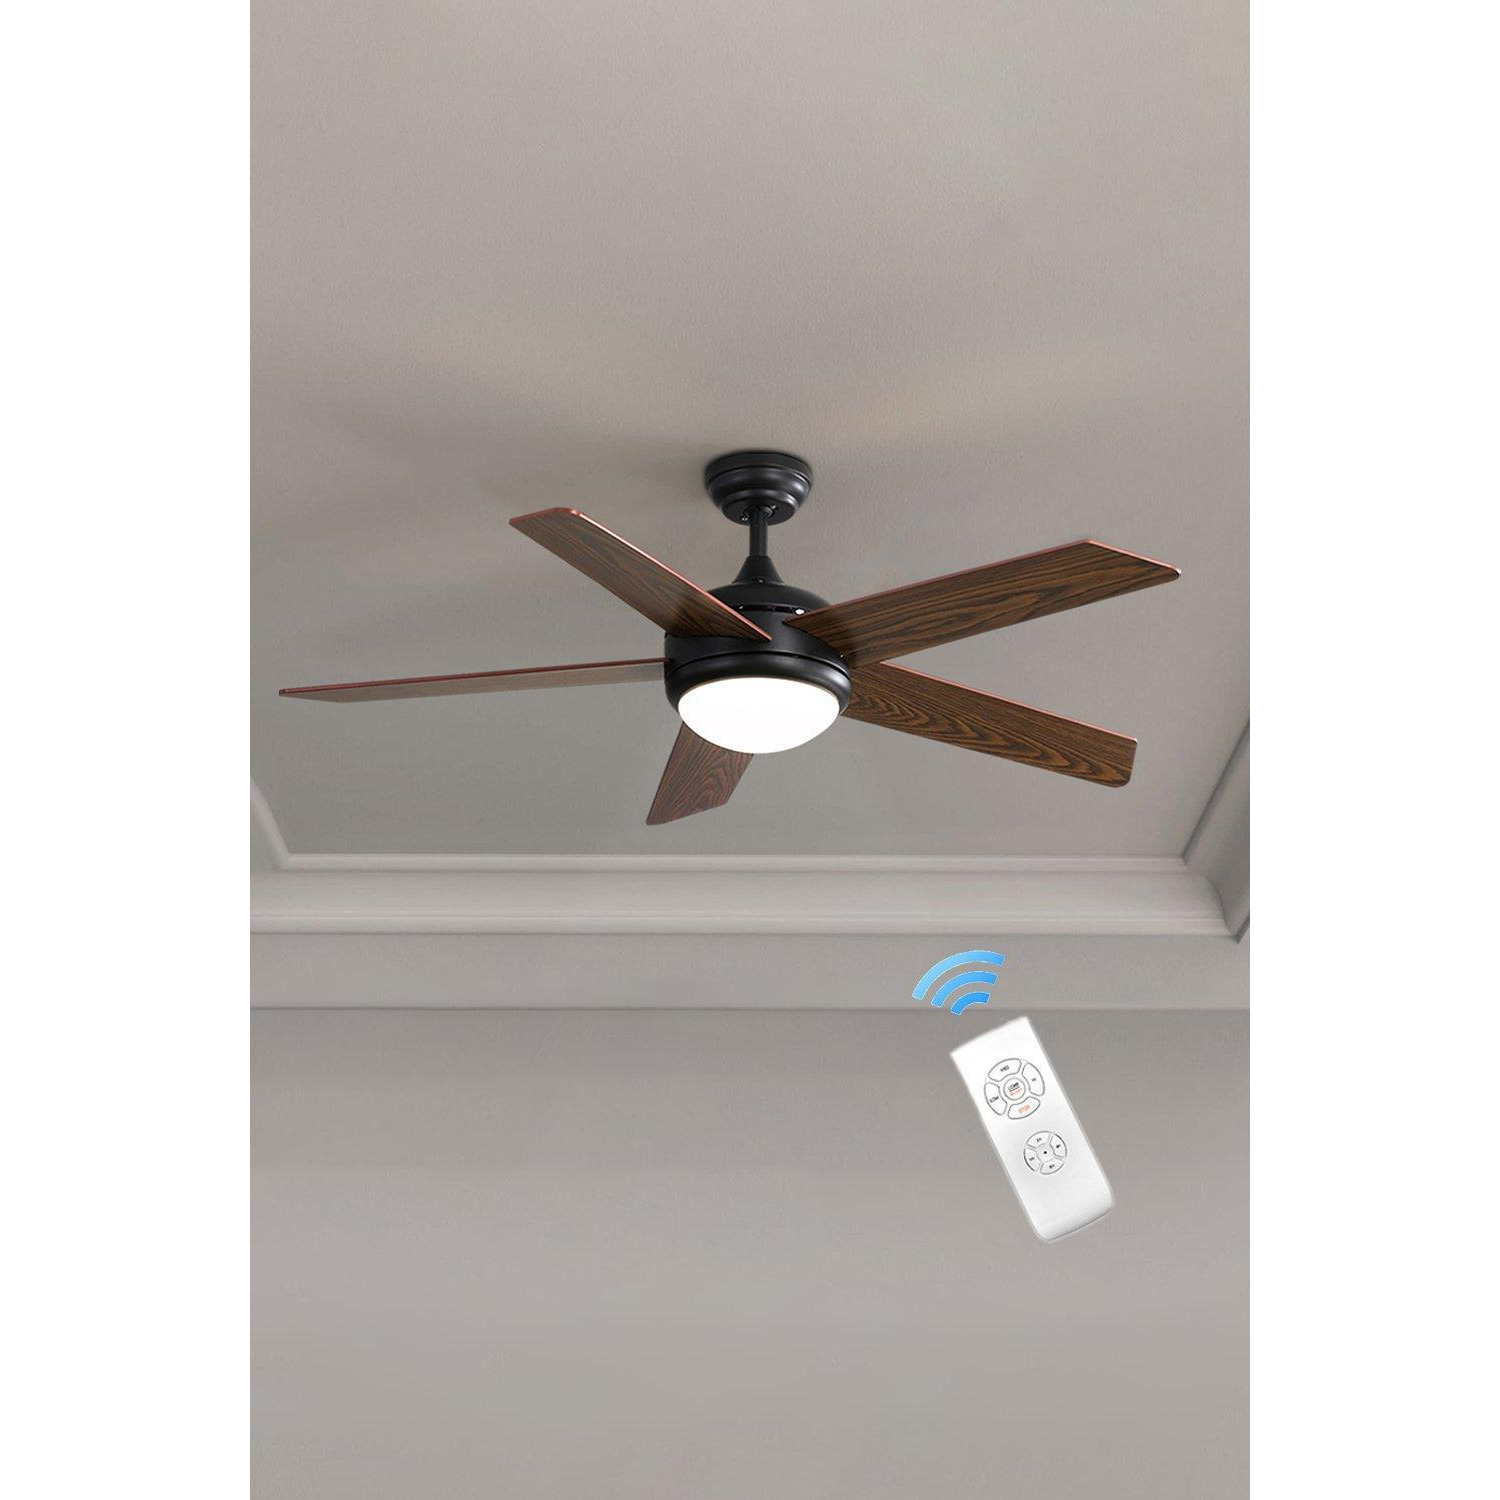 Rustic Wooden 5-Blade Ceiling Fan with LED Light - image 1